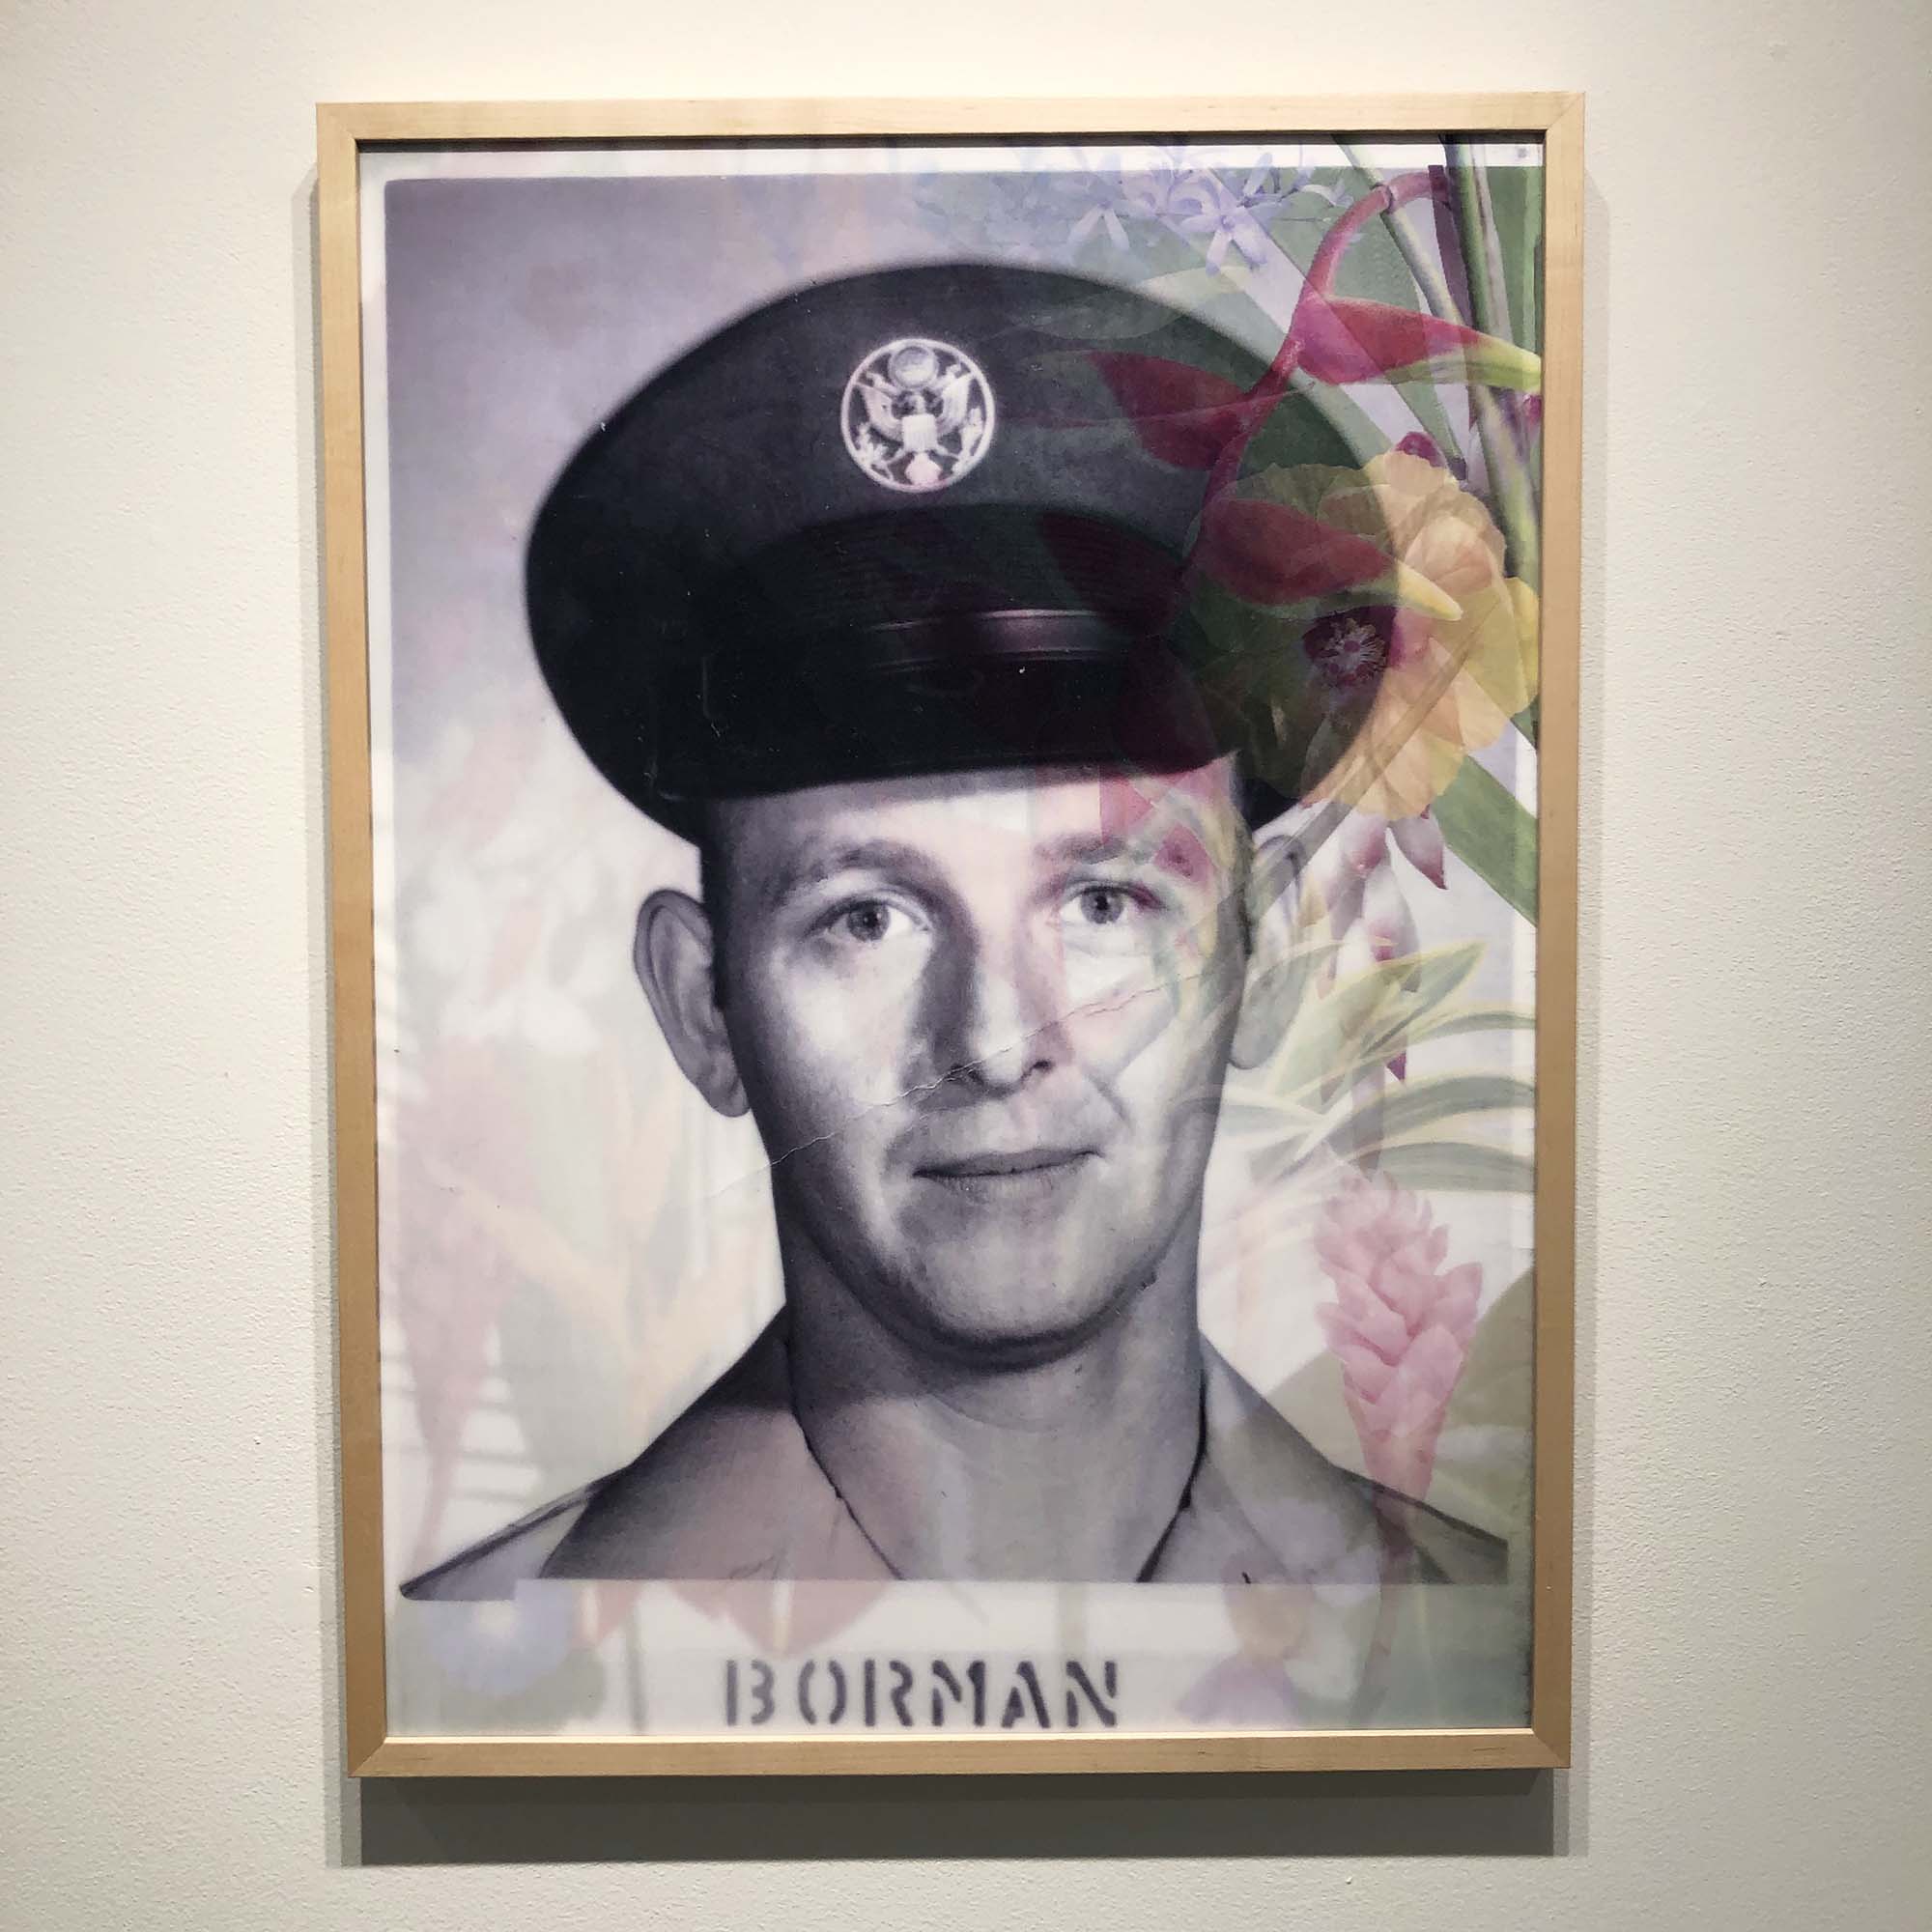 a military portrait of a man with the name Borman and some flowers on the right